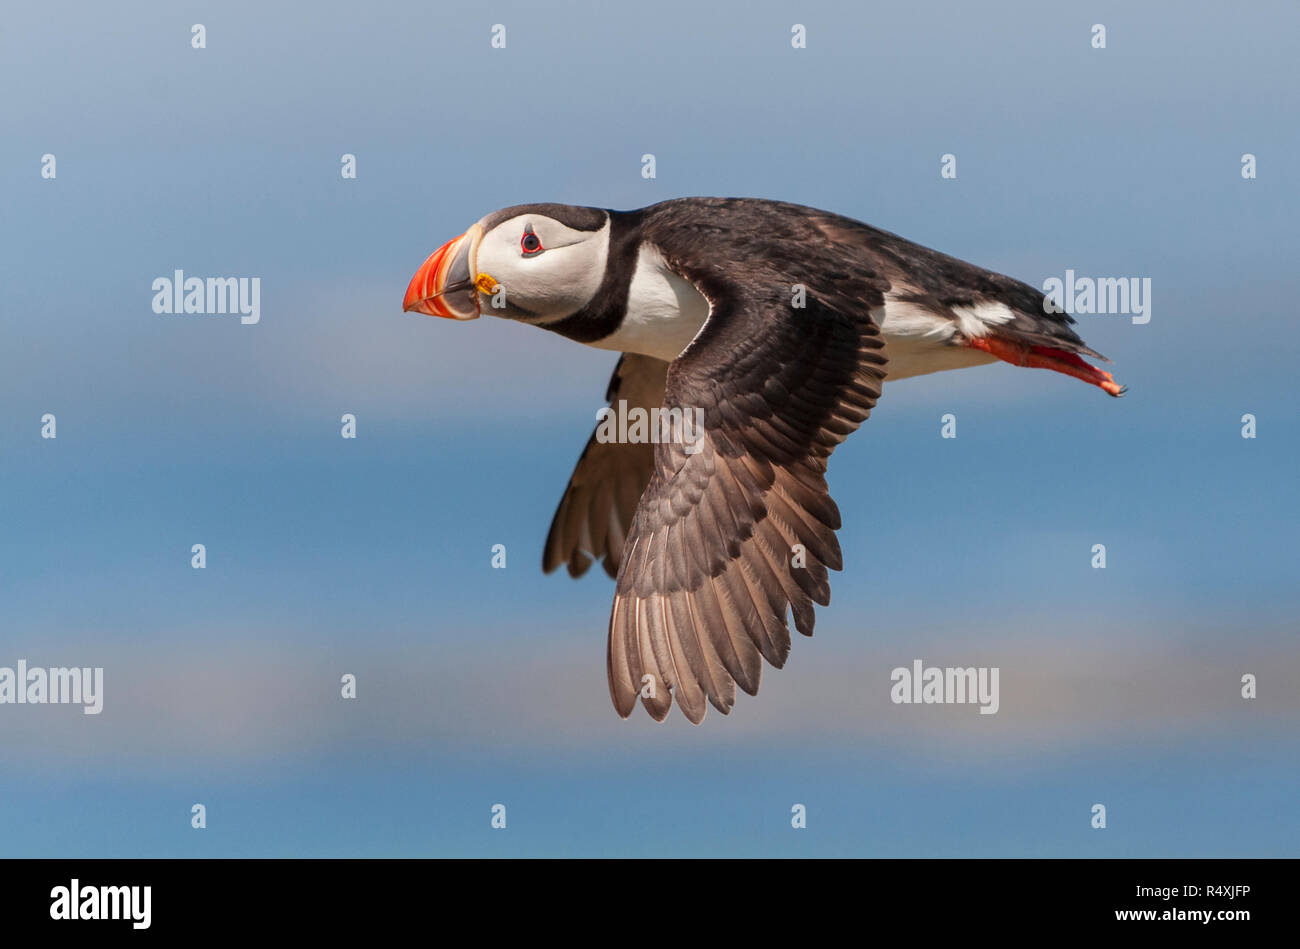 Puffins in flight - Atlantic puffin Fratercula arctica flying in a clear sky Stock Photo